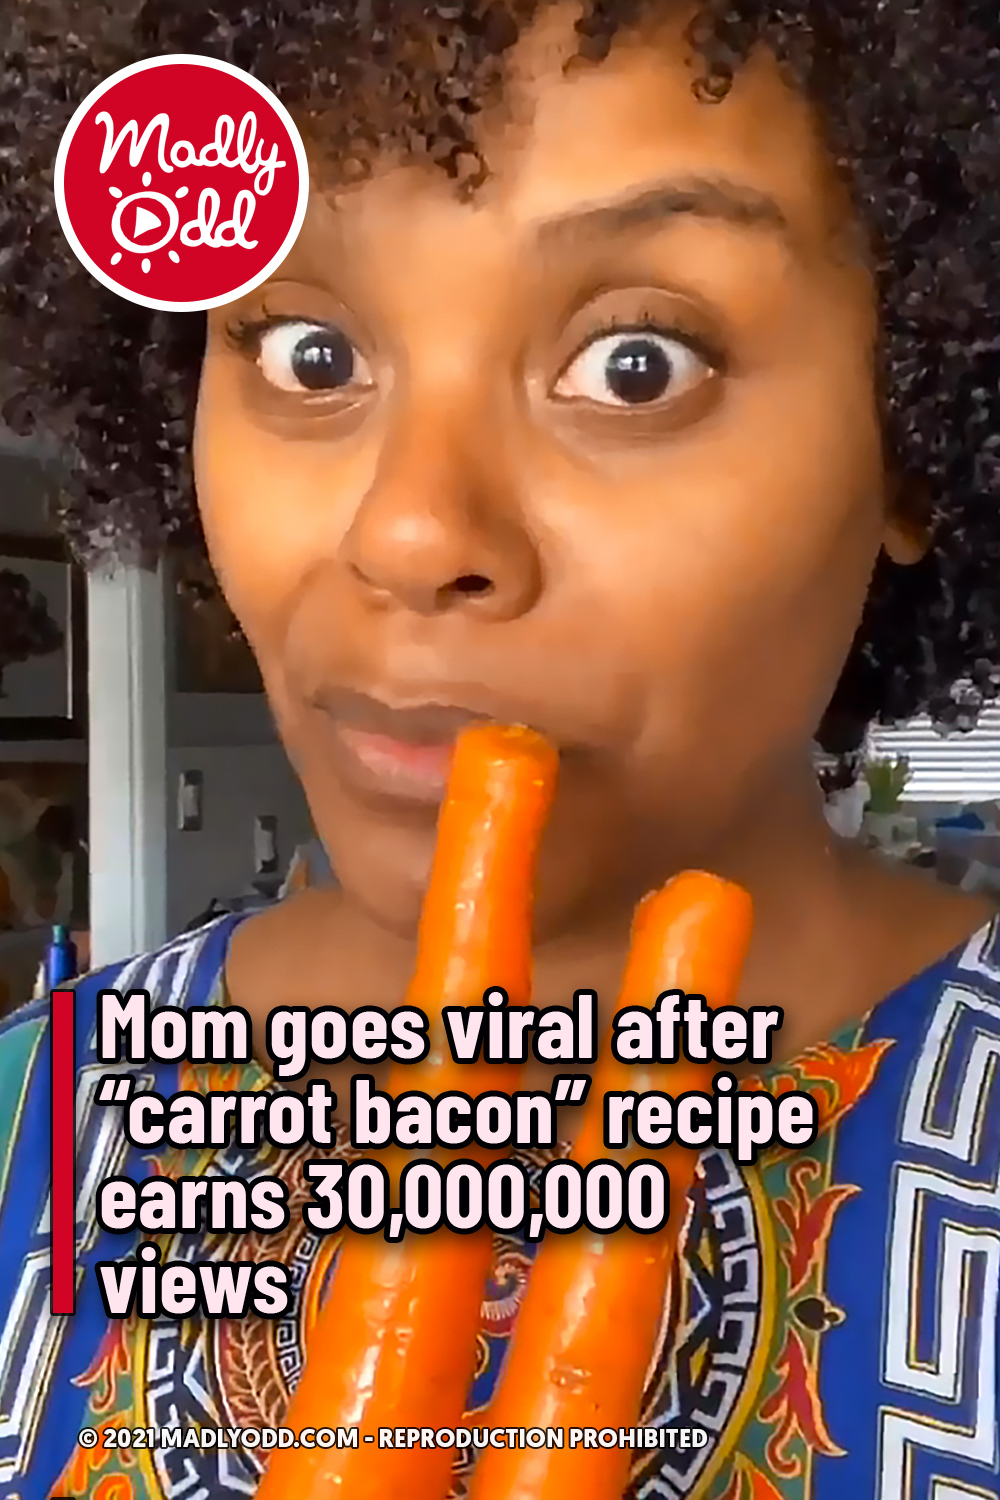 Mom goes goes viral after “carrot bacon” recipe earns 30,000,000 views